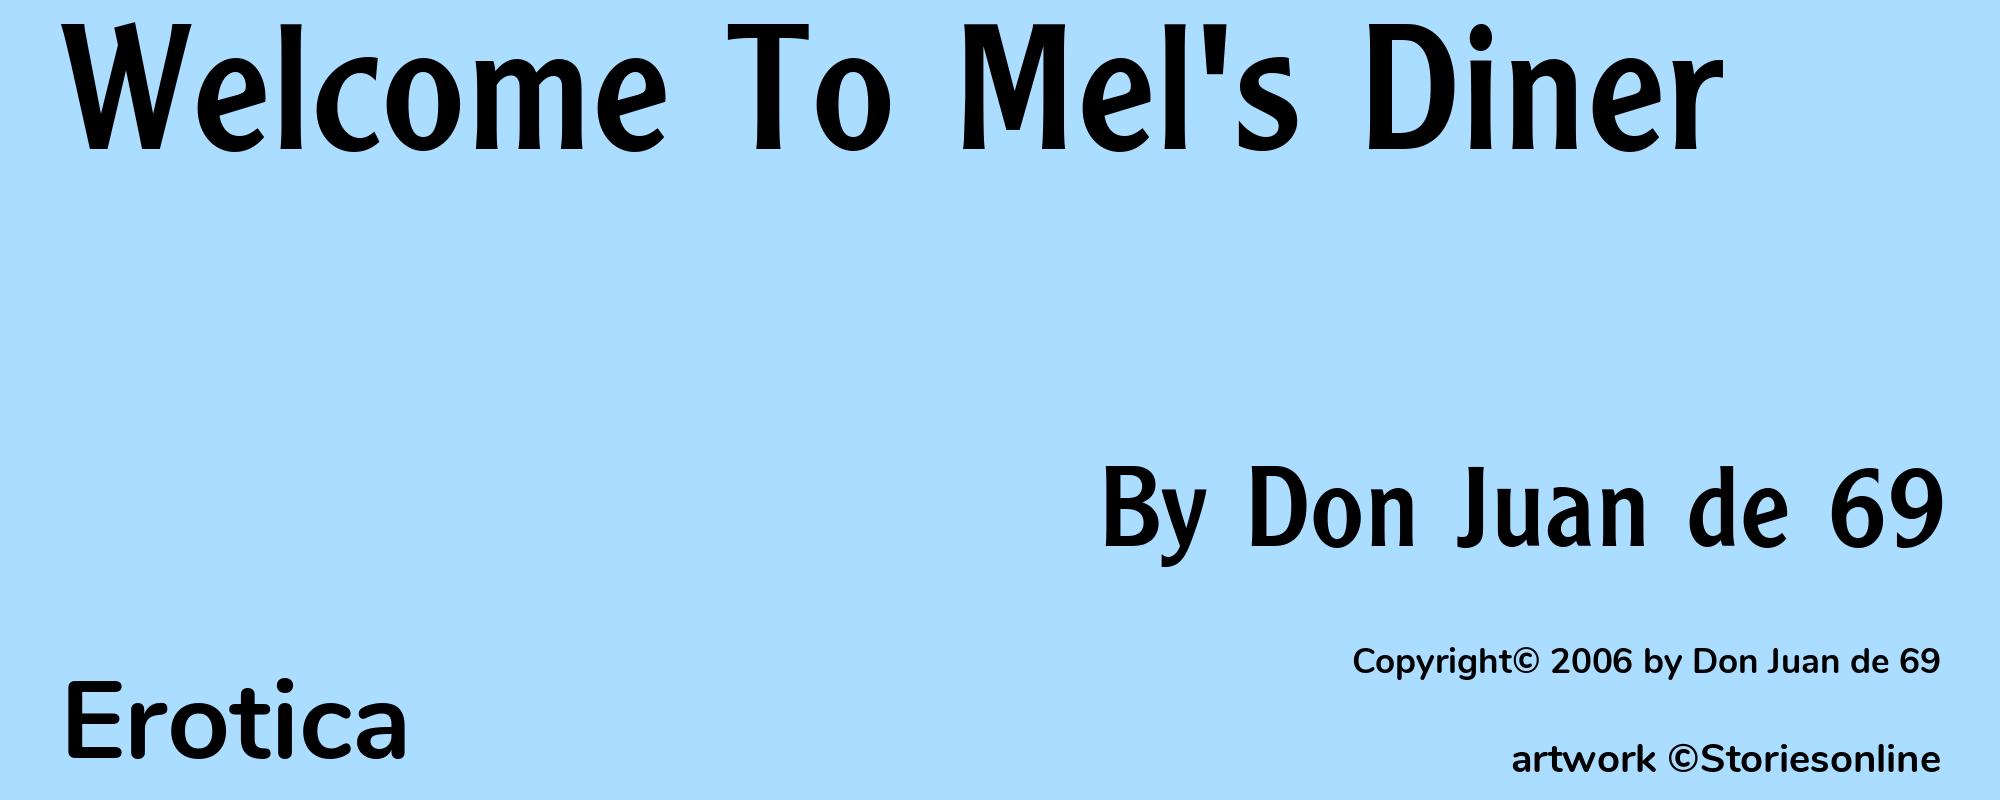 Welcome To Mel's Diner - Cover